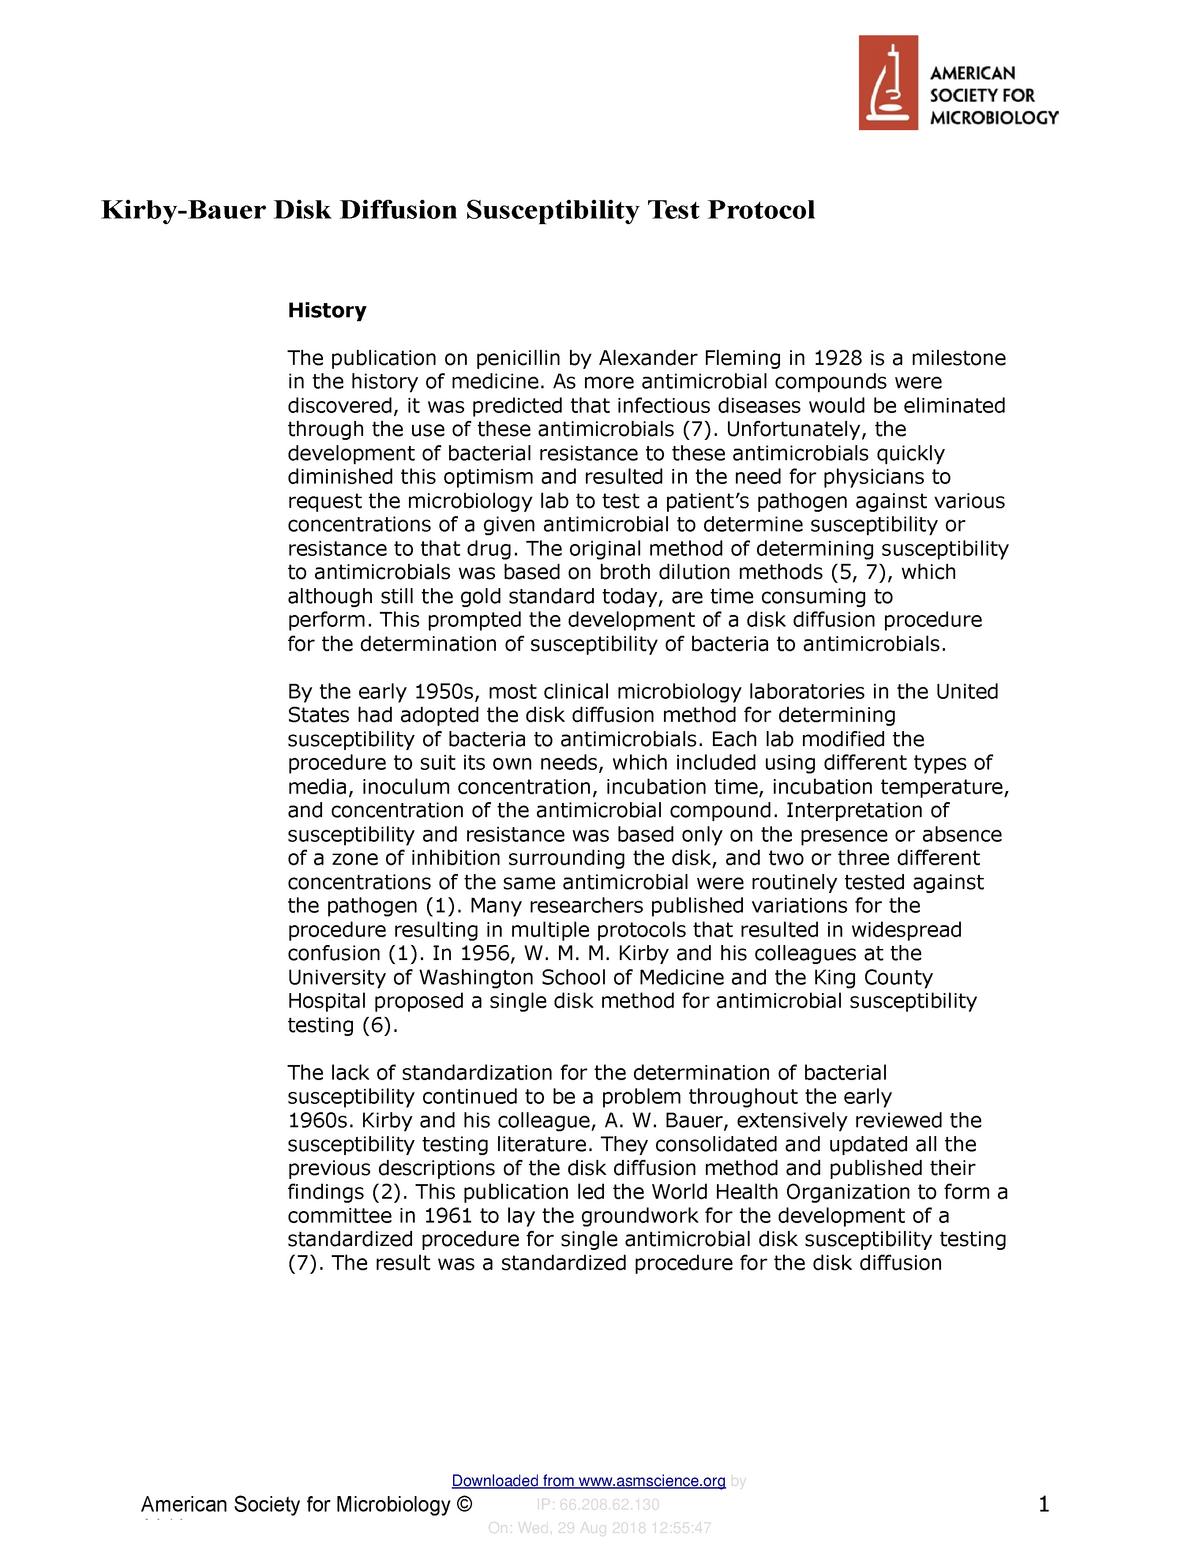 Kirby Bauer Disk Diffusion Susceptibility Test Protocol pdf - Kirby-Bauer  Disk Diffusion - Studocu